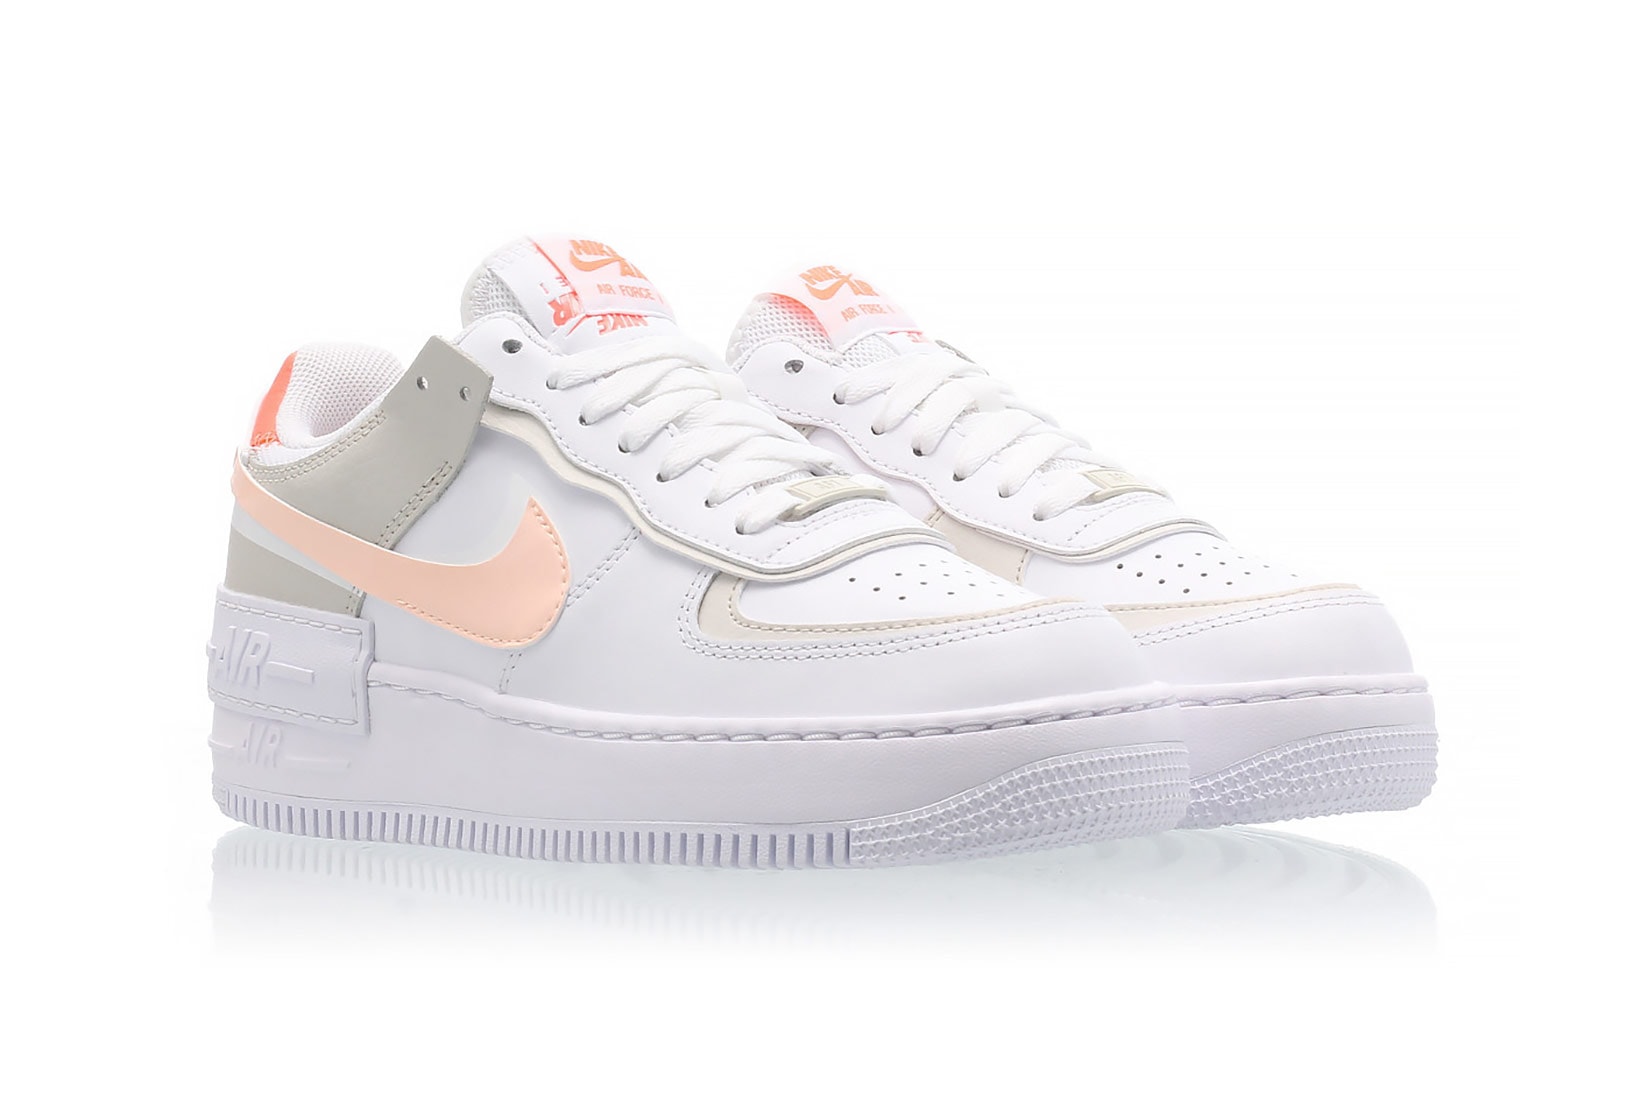 nike air force 1 shadow womens sneakers bright mango white pastel pink orange ivory colorway footwear sneakerhead shoes lateral laces